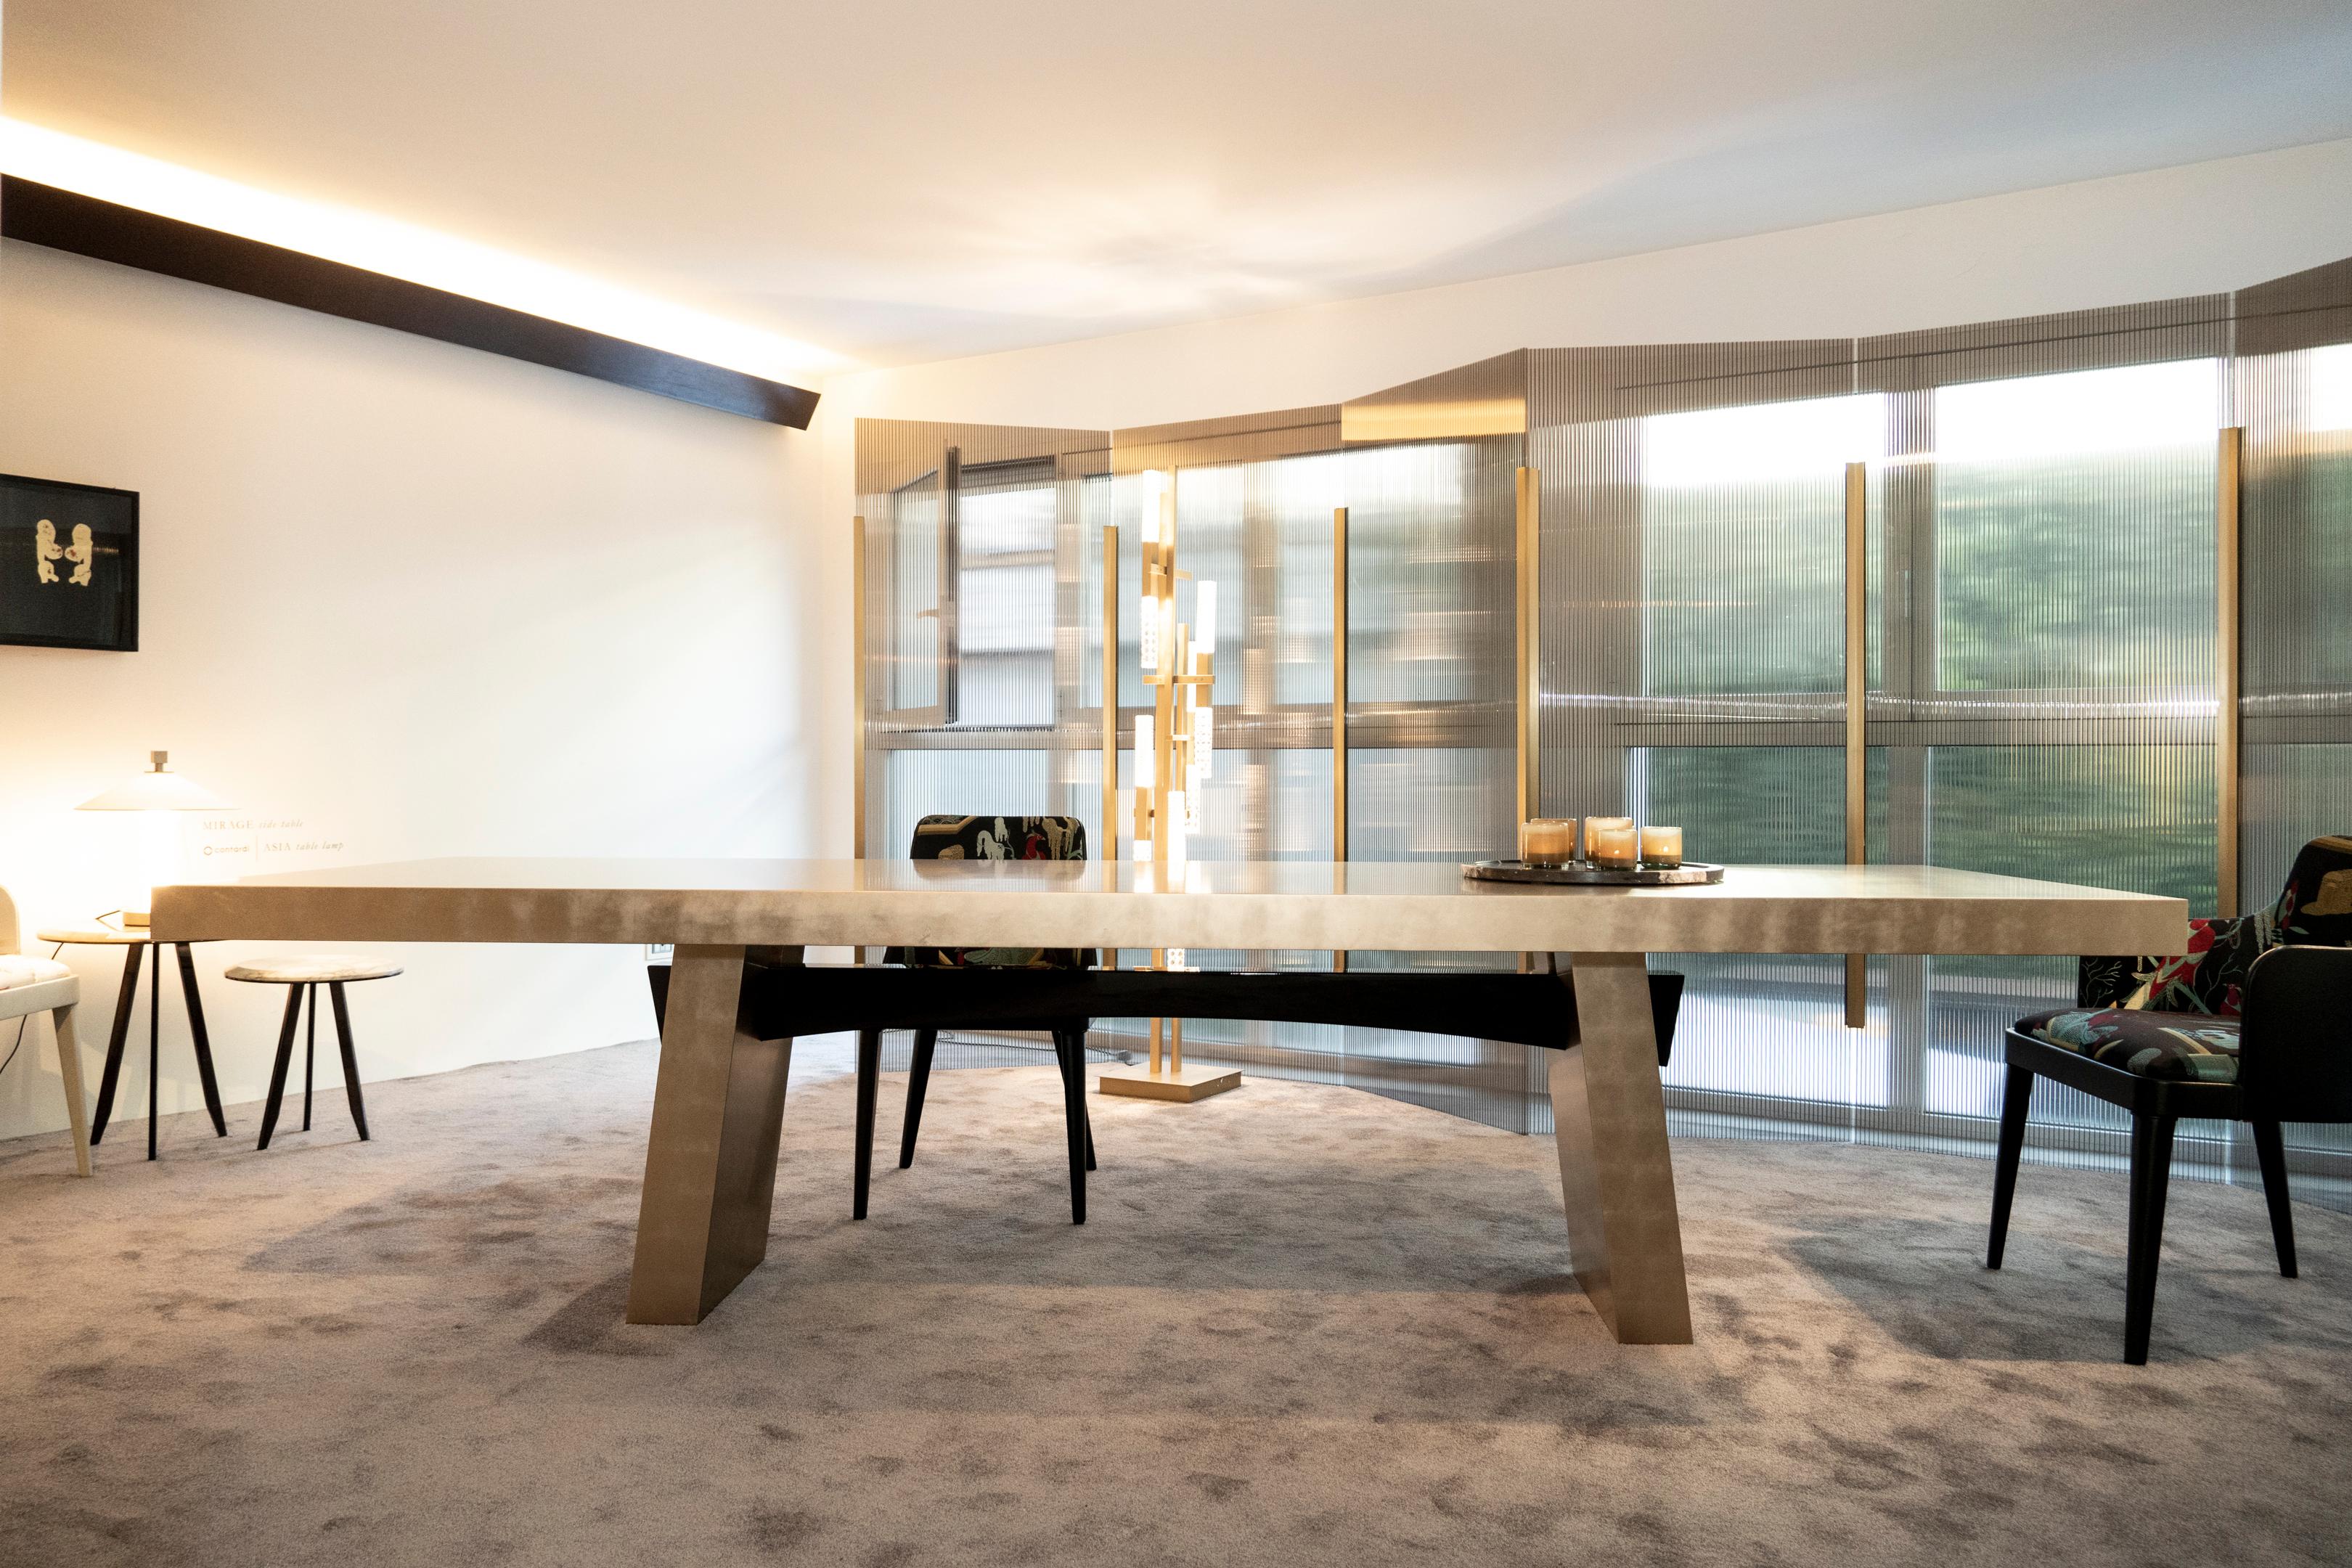 A table covered in 22-karat pure gold leaf. Luxury and essentiality. Ostentation and concreteness. Provocation and game. The WA table, renamed Midas with this new livery, does not forget the balance of proportions typical of the Japanese style, from